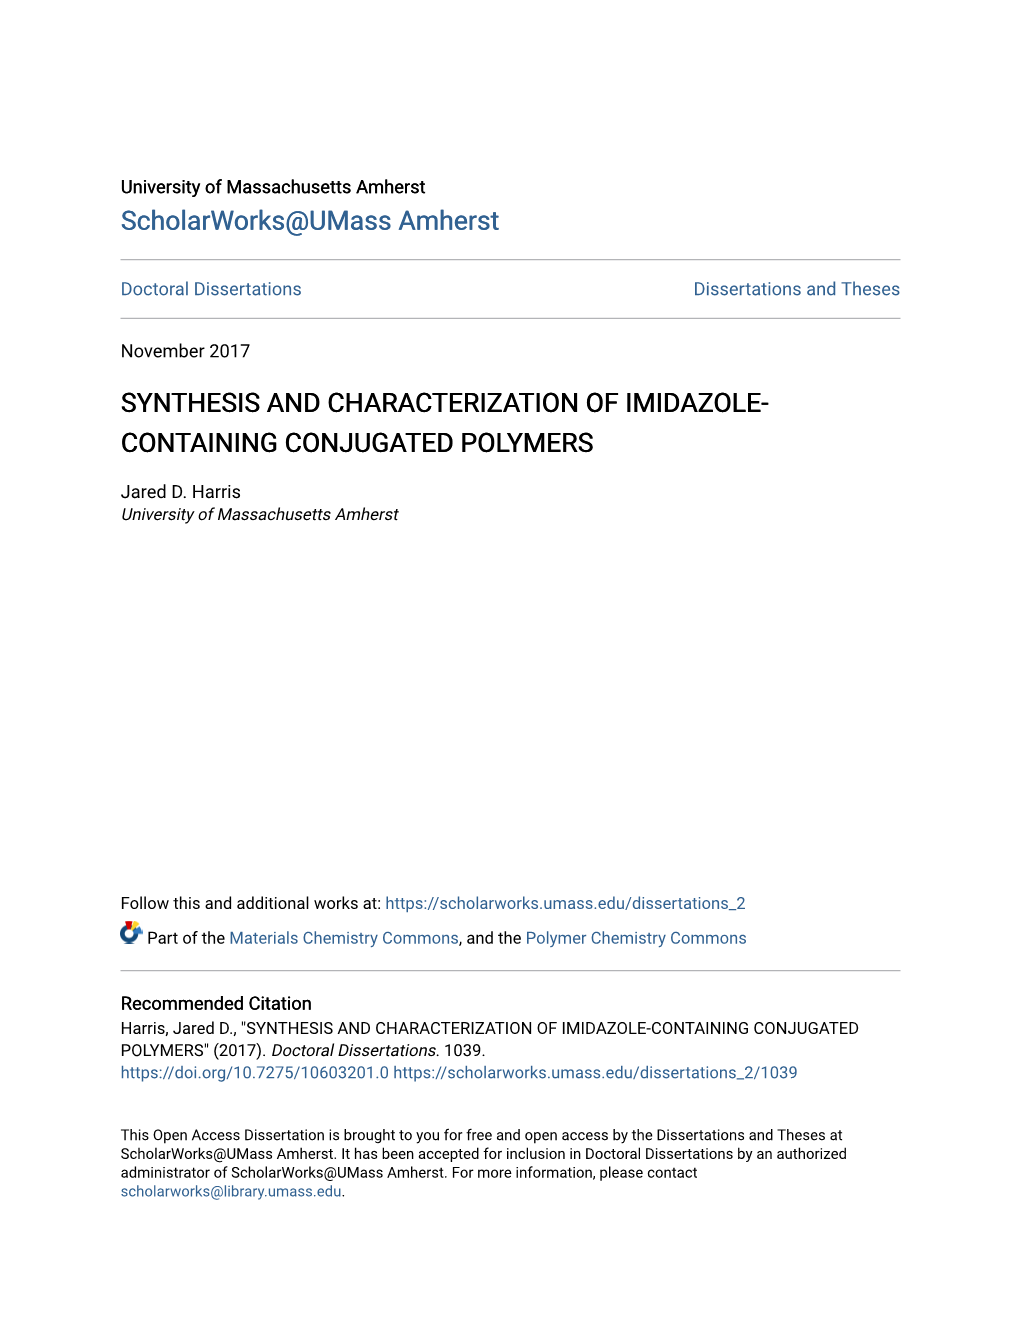 Synthesis and Characterization of Imidazole-Containing Conjugated Polymers" (2017)